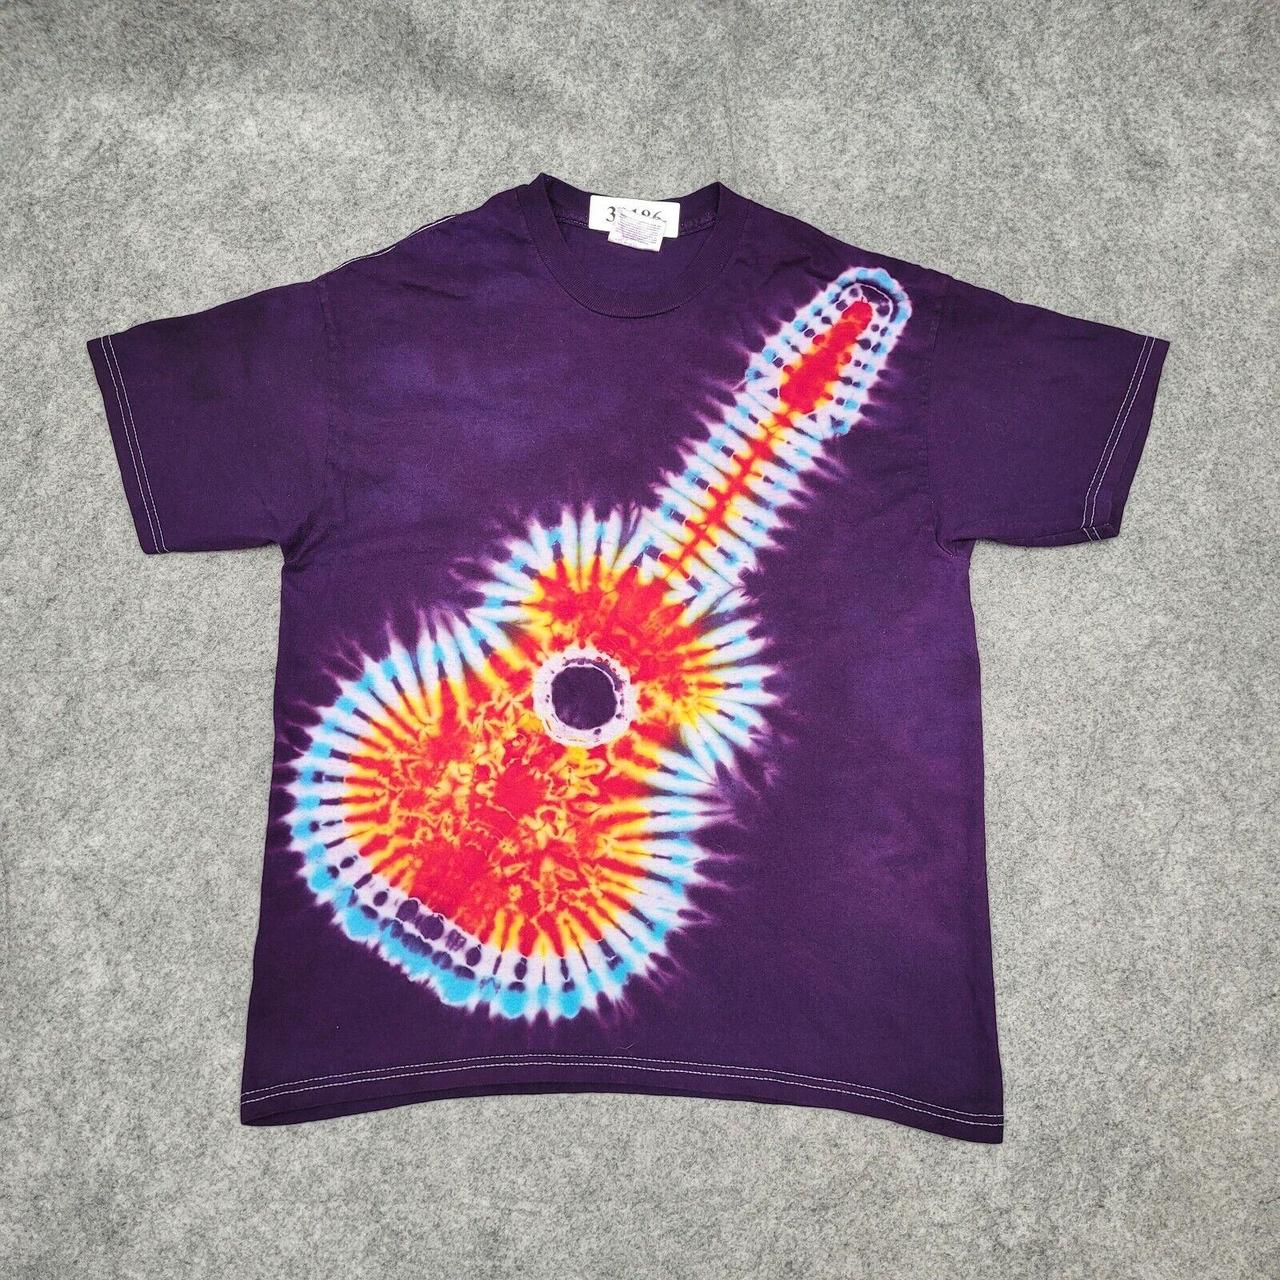 Vintage Psychedelic Guitar Tie-Dye T-Shirt Youth XL... - Depop